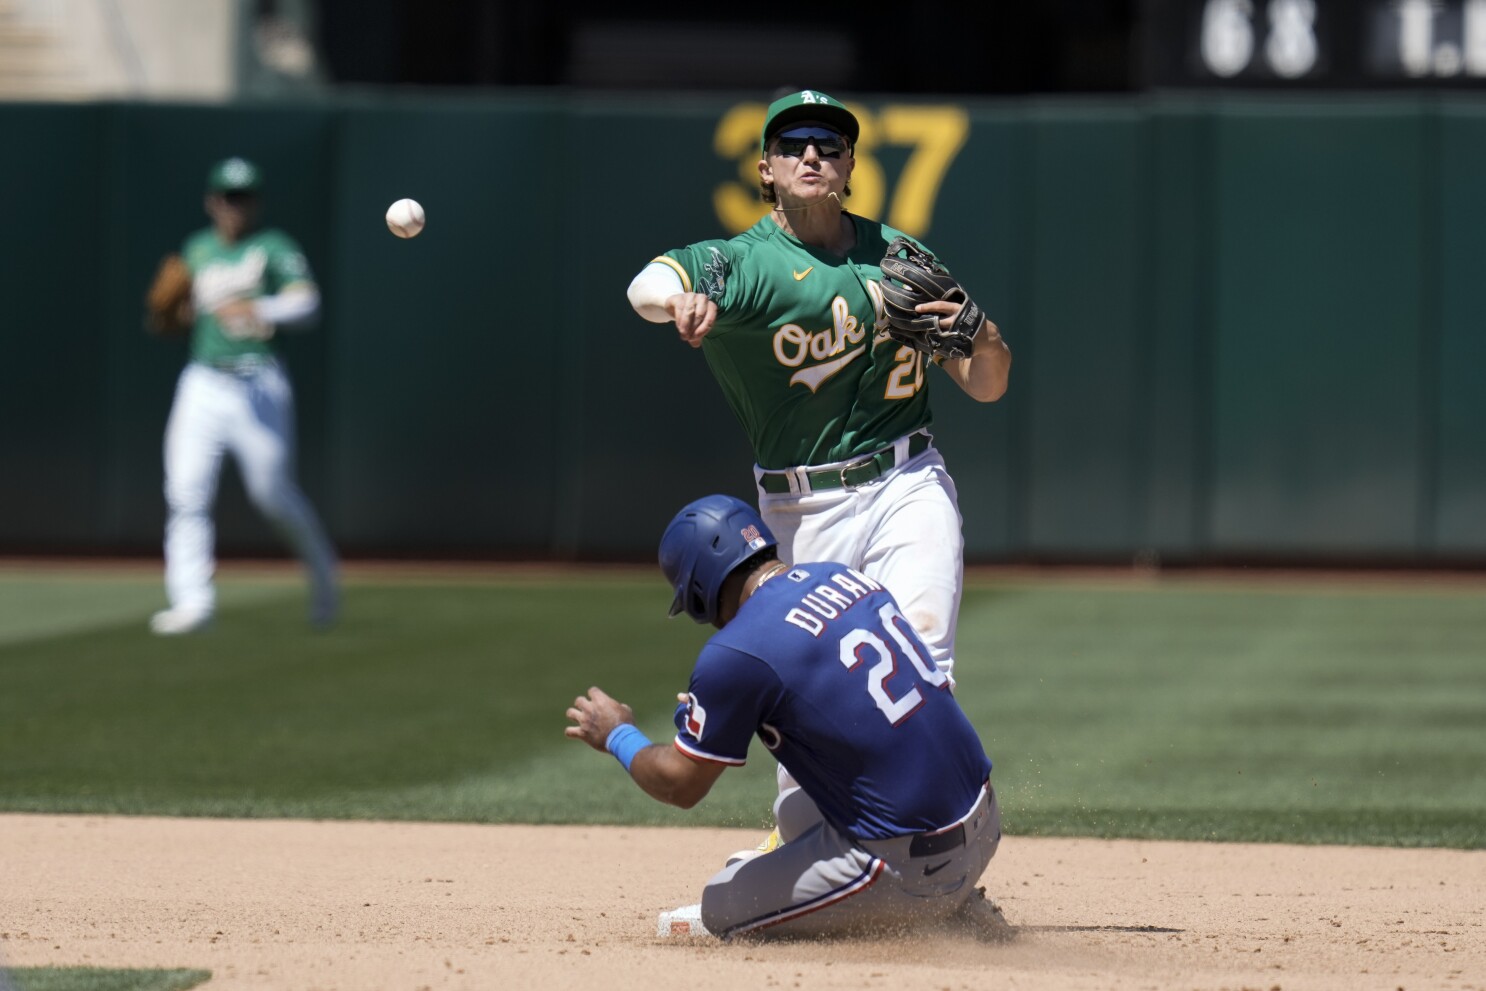 Tarnok earns 1st MLB win as Athletics limit AL West-leading Rangers to 4  hits in 2-0 victory